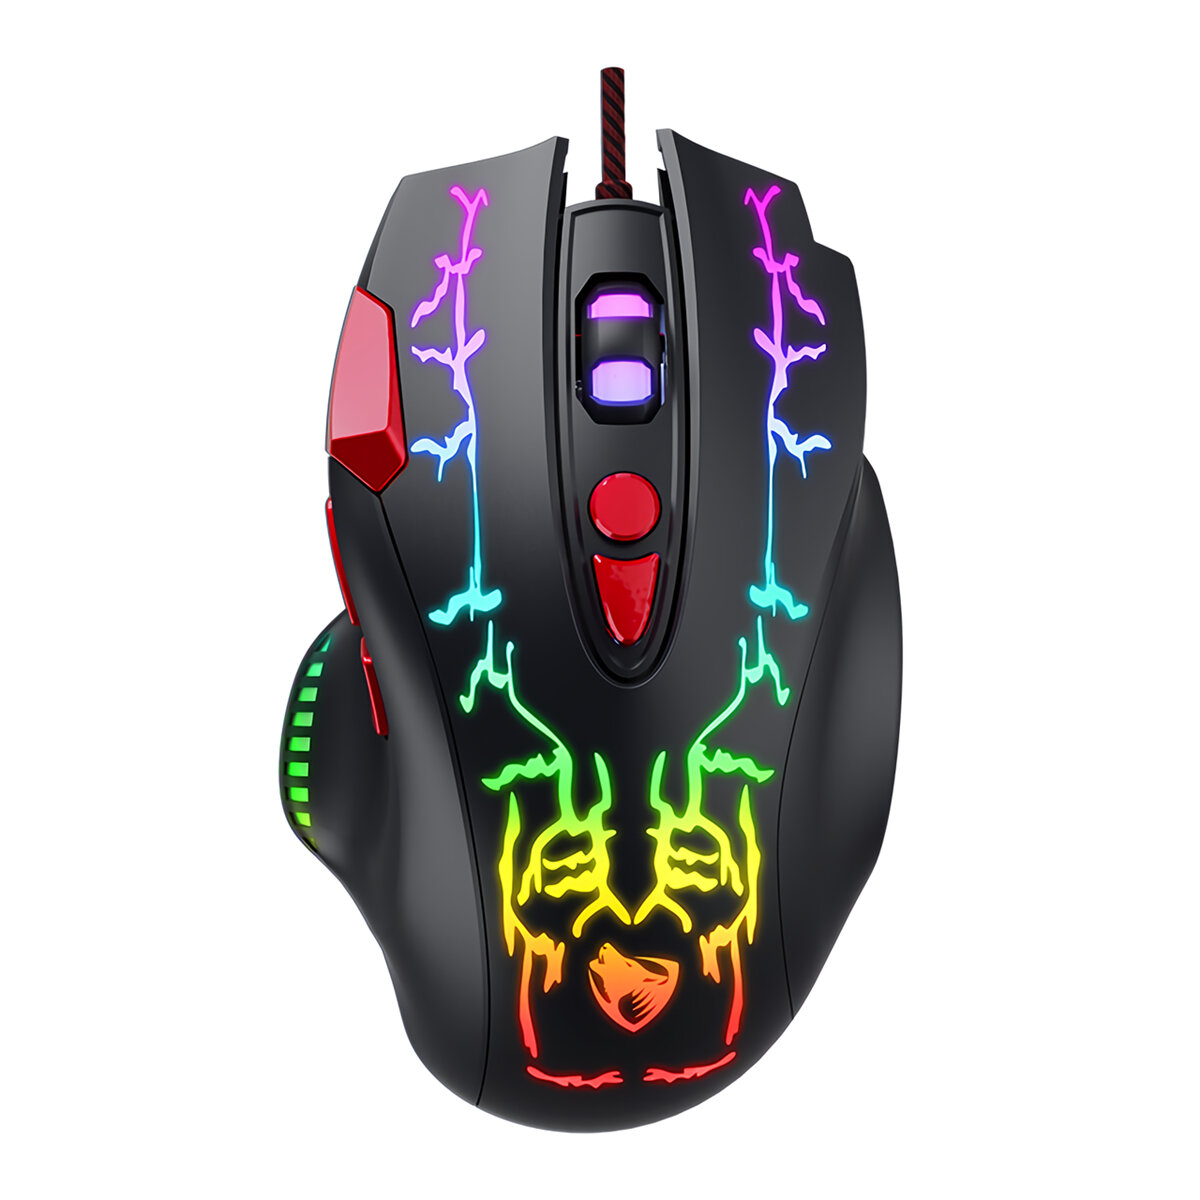 

T-Wolf G550 Wired Gaming Mouse 6400DPI 8 Buttons RGB Luminous Backlit Home Office E-sport Mice for Compuer PC Laptop Gam